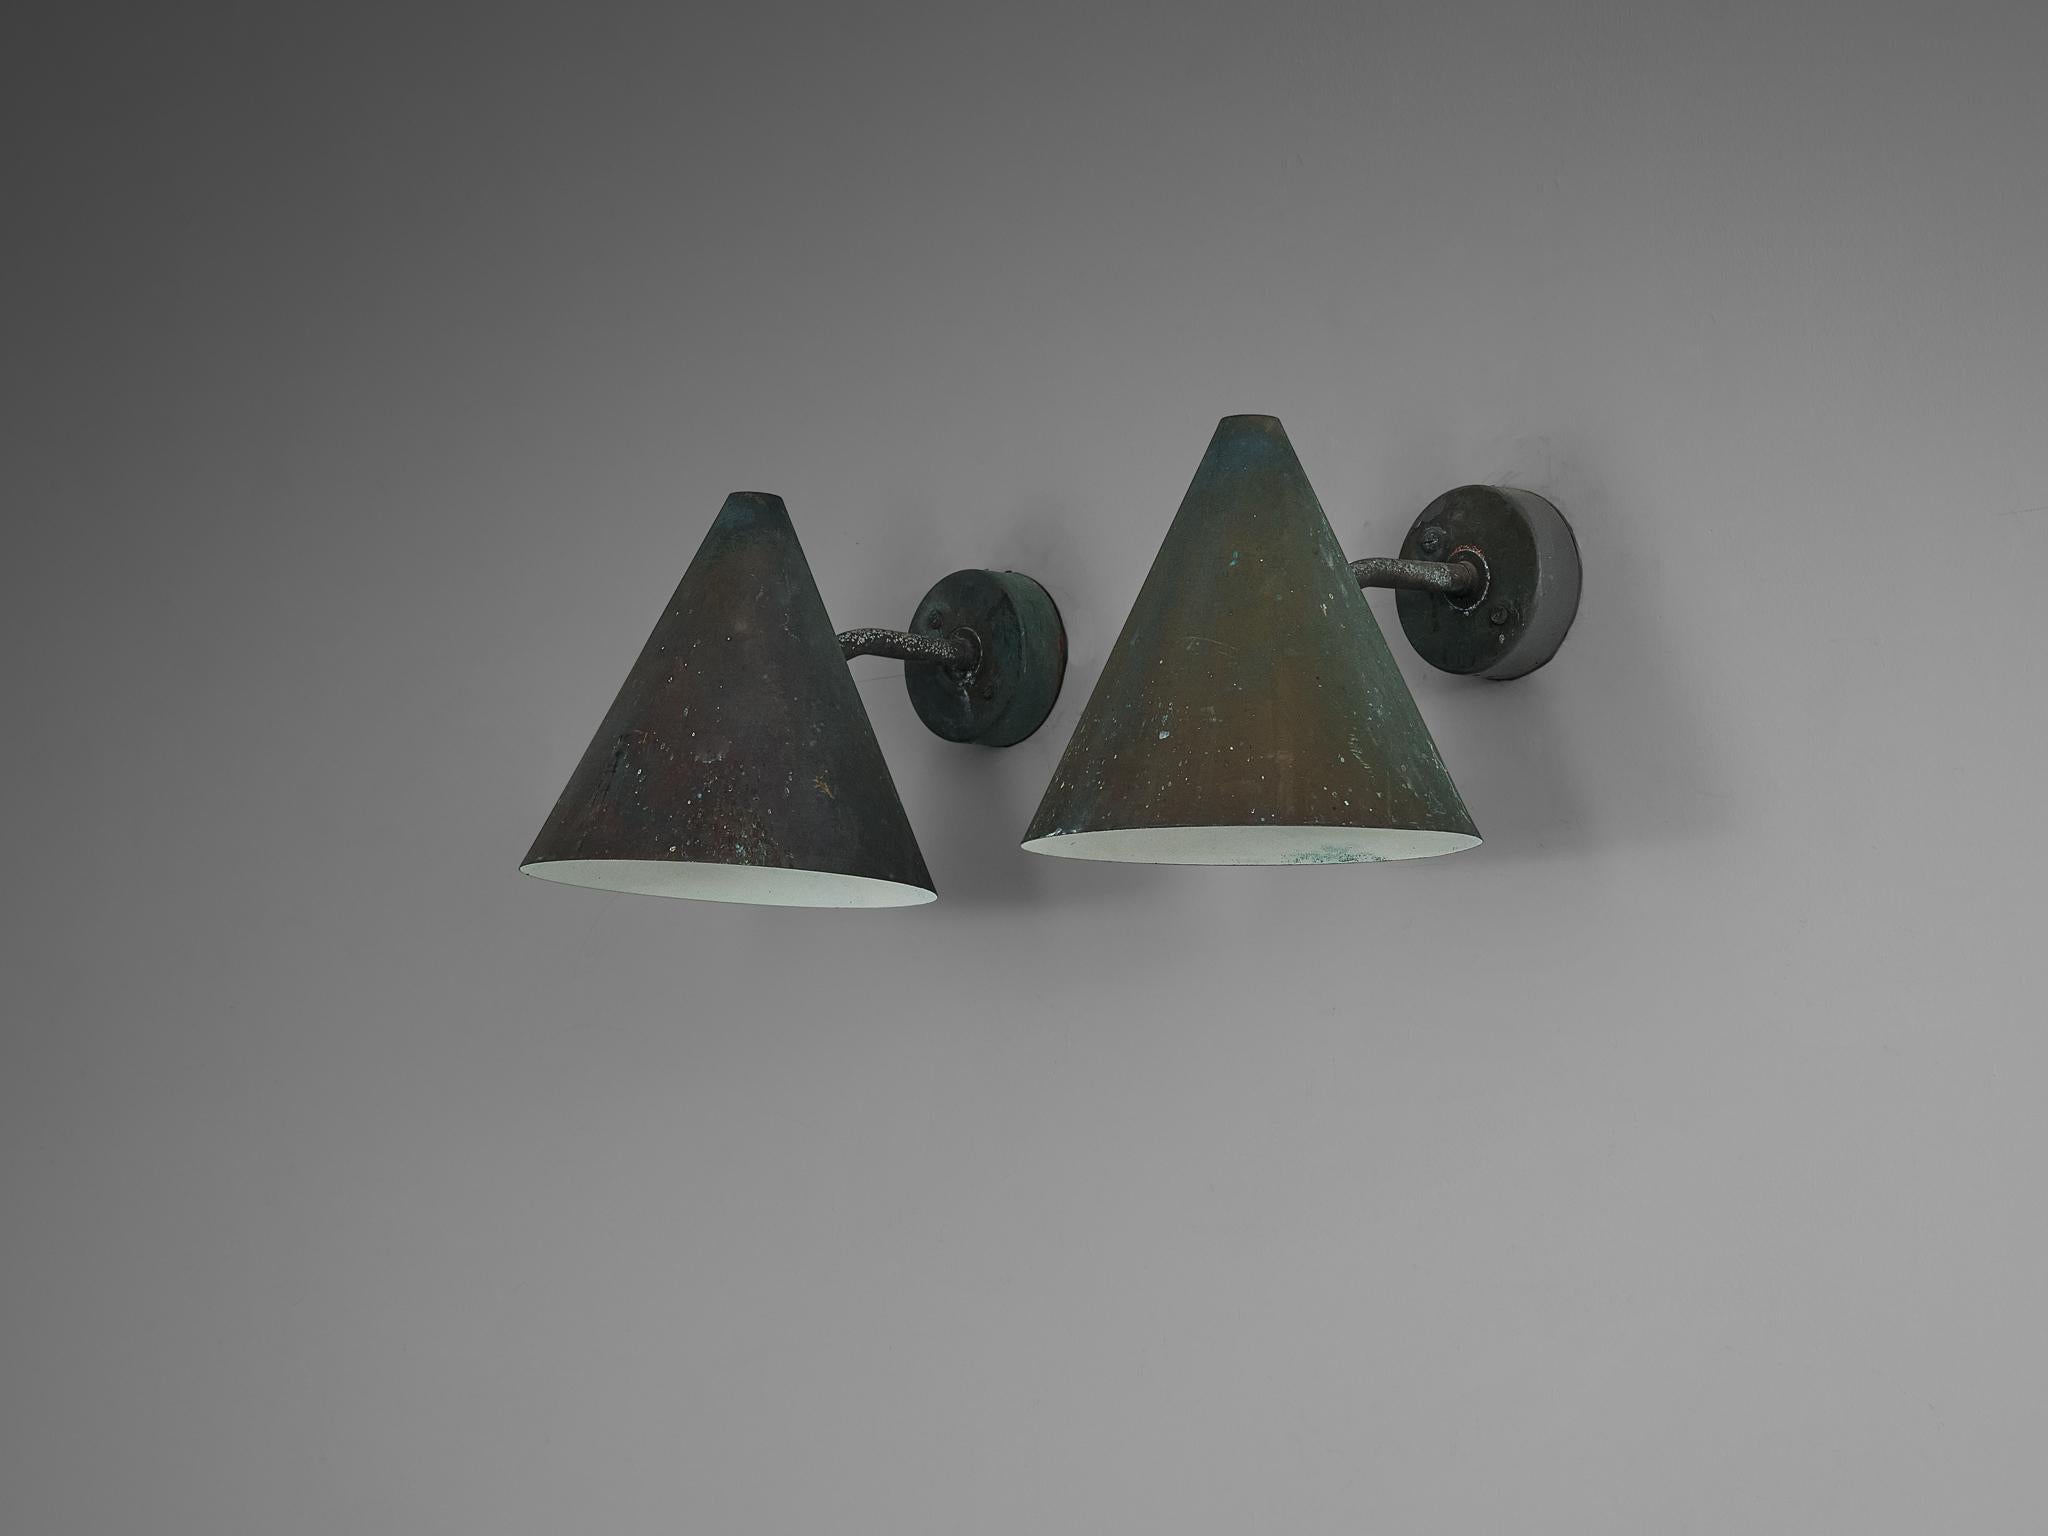  Hans-Agne Jakobsson 'Tratten' Wall Lights in Patinated Copper  3